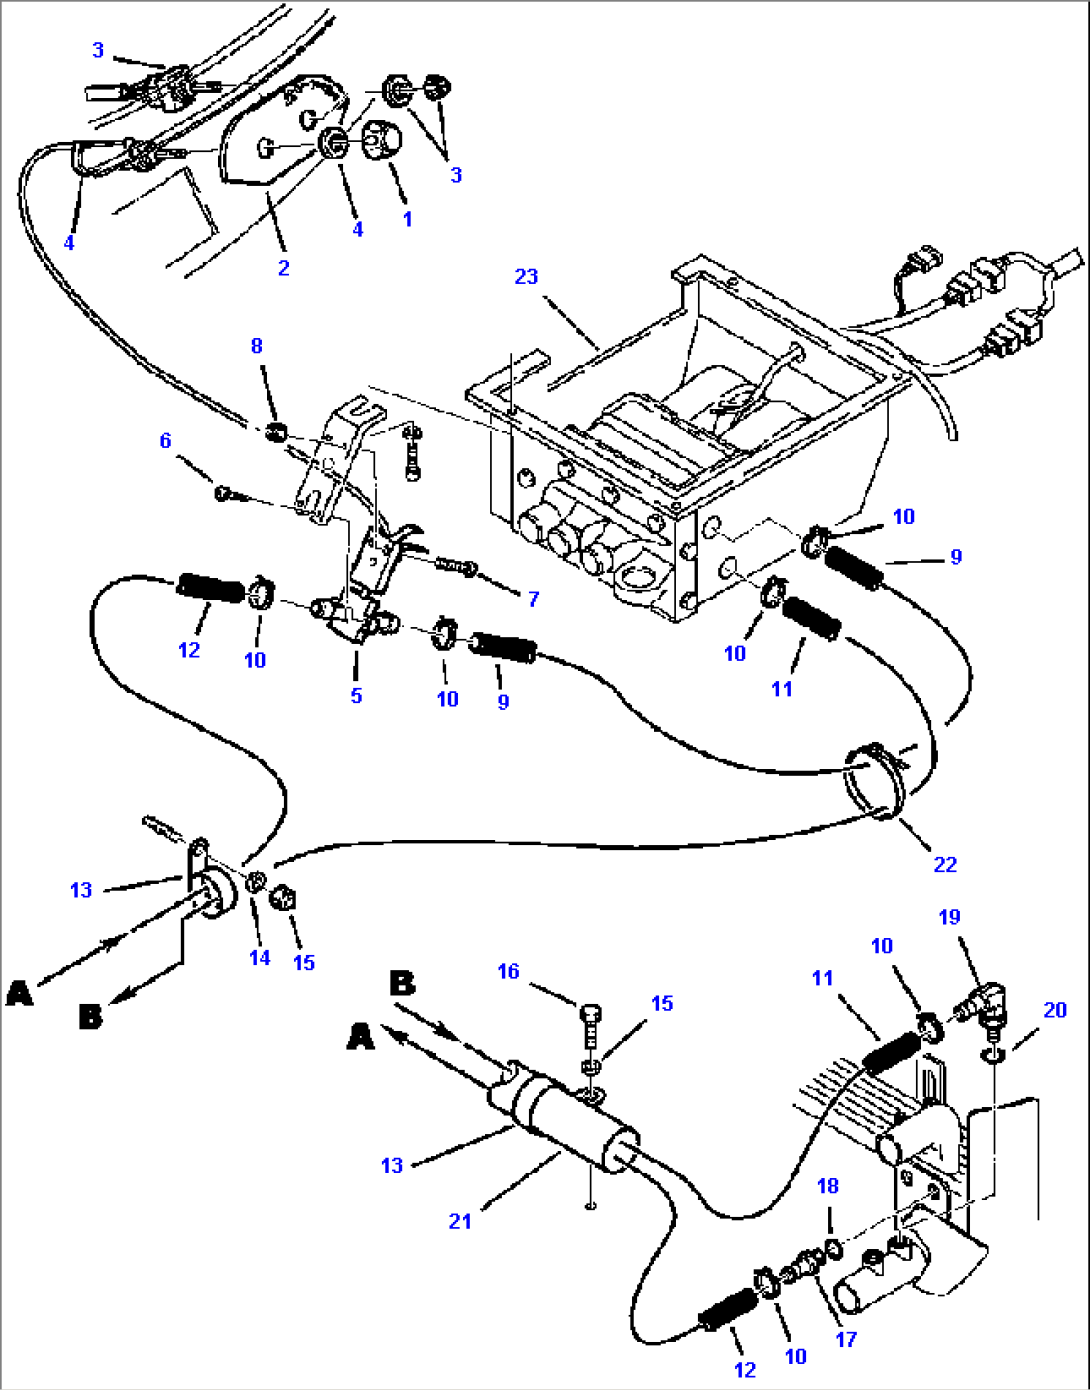 FIG. K5700-02A5 AIR CONDITIONER - HEATER CONTROLS AND PIPING